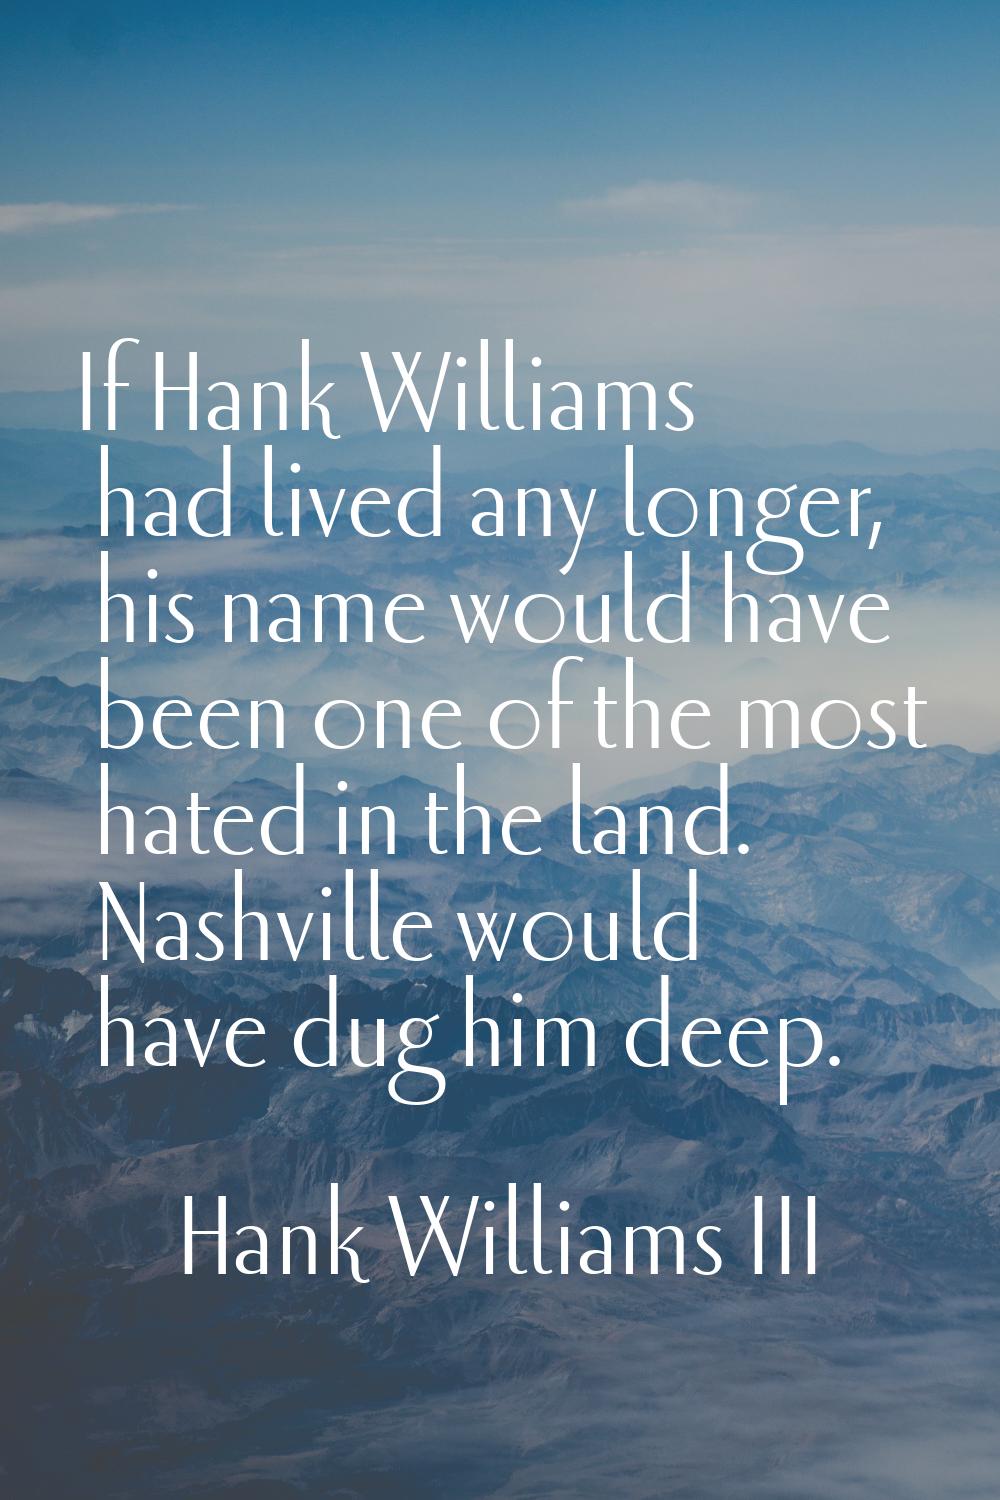 If Hank Williams had lived any longer, his name would have been one of the most hated in the land. 